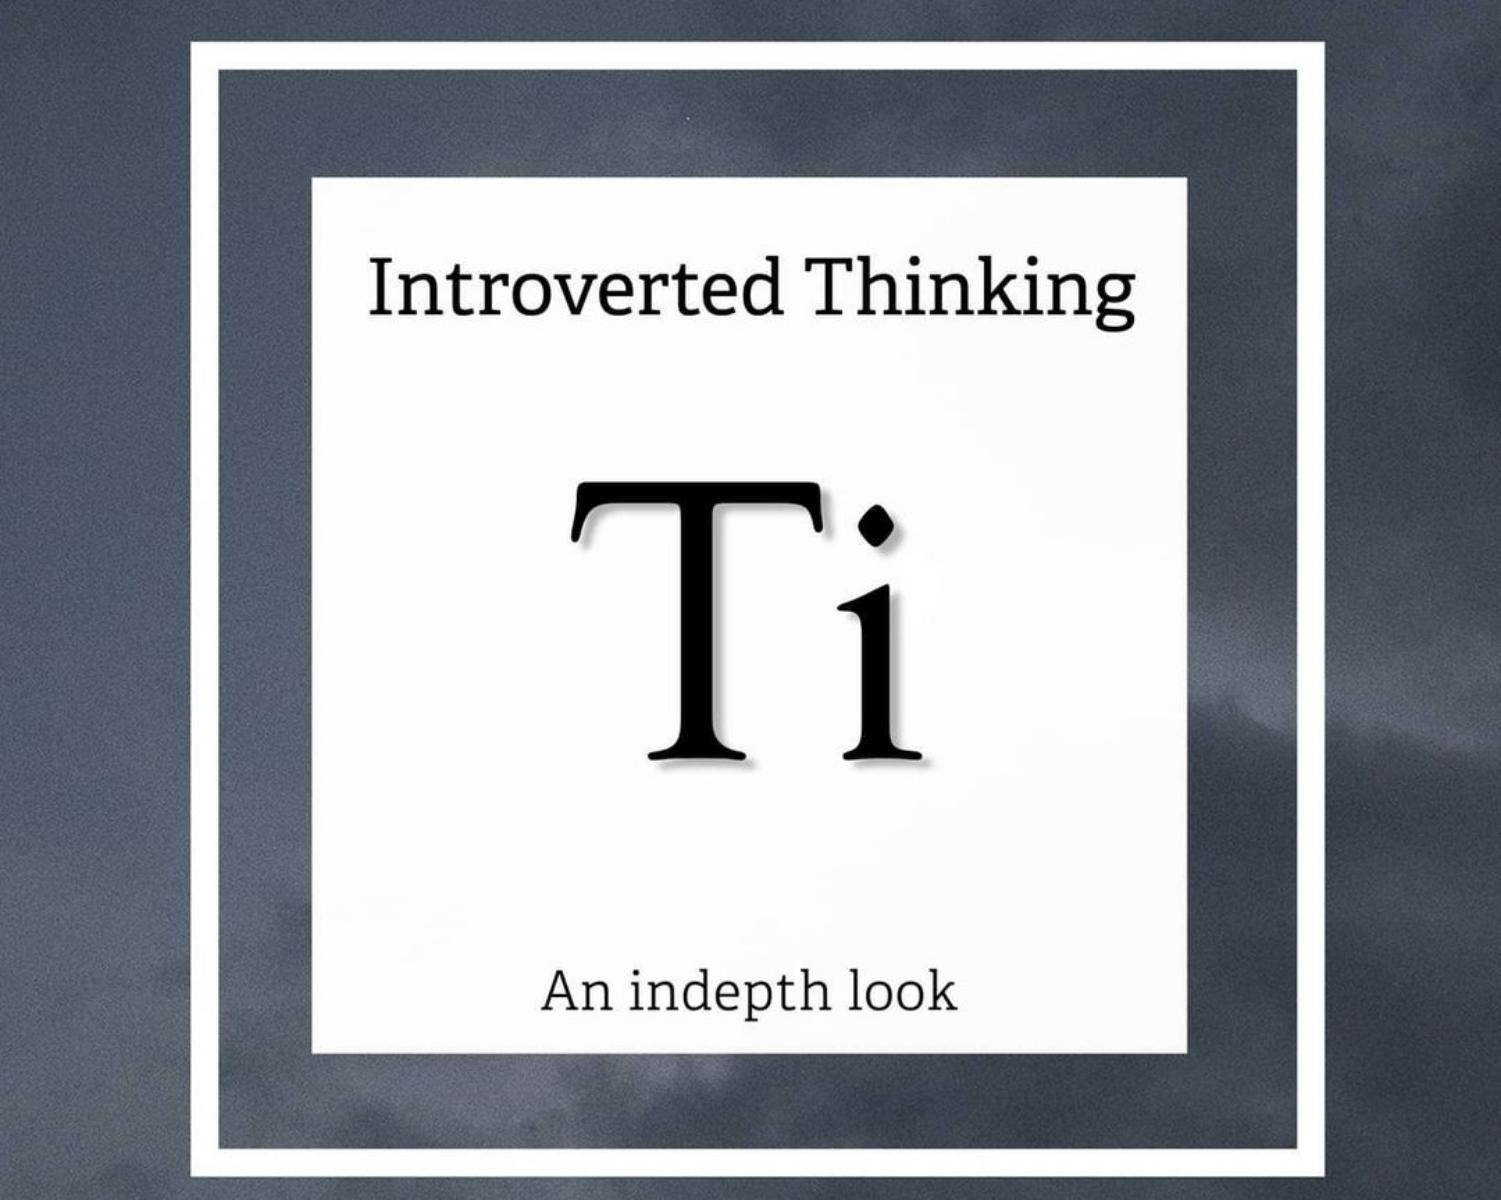 Introverted Thinking (Ti) - "Accuracy"